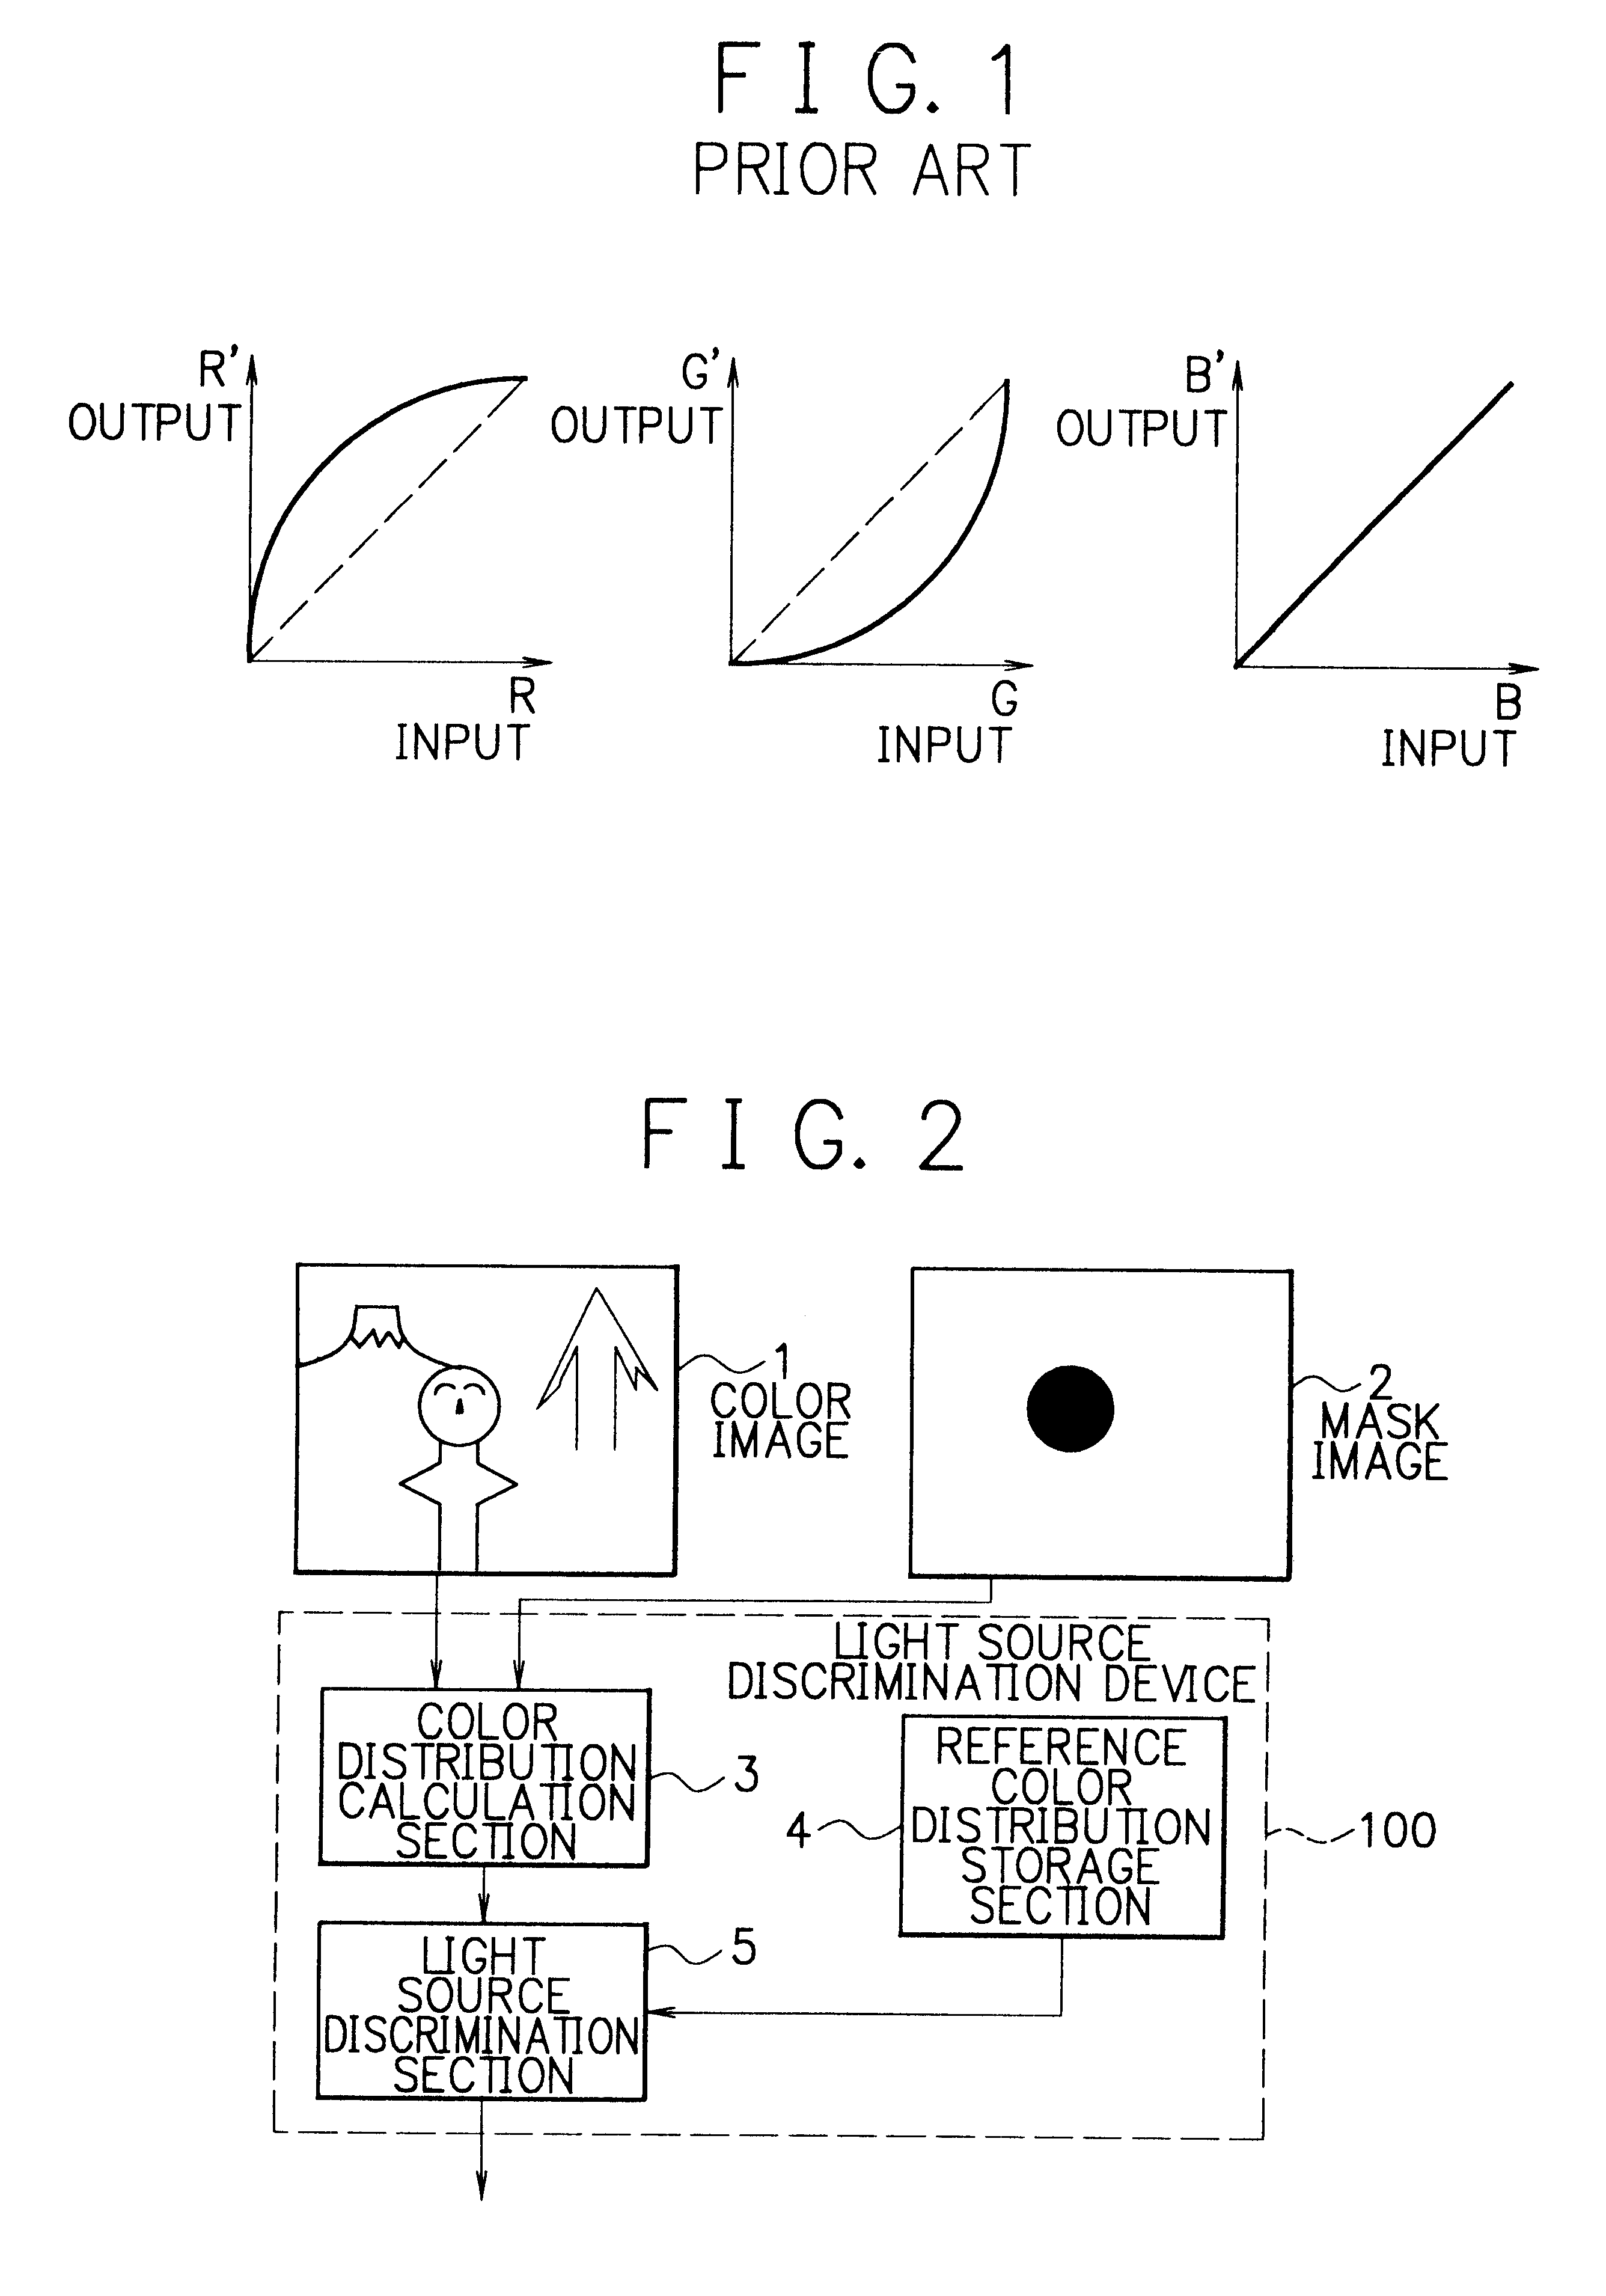 Method and device of light source discrimination, skin color correction, and color image correction, and storage medium thereof capable of being read by computer